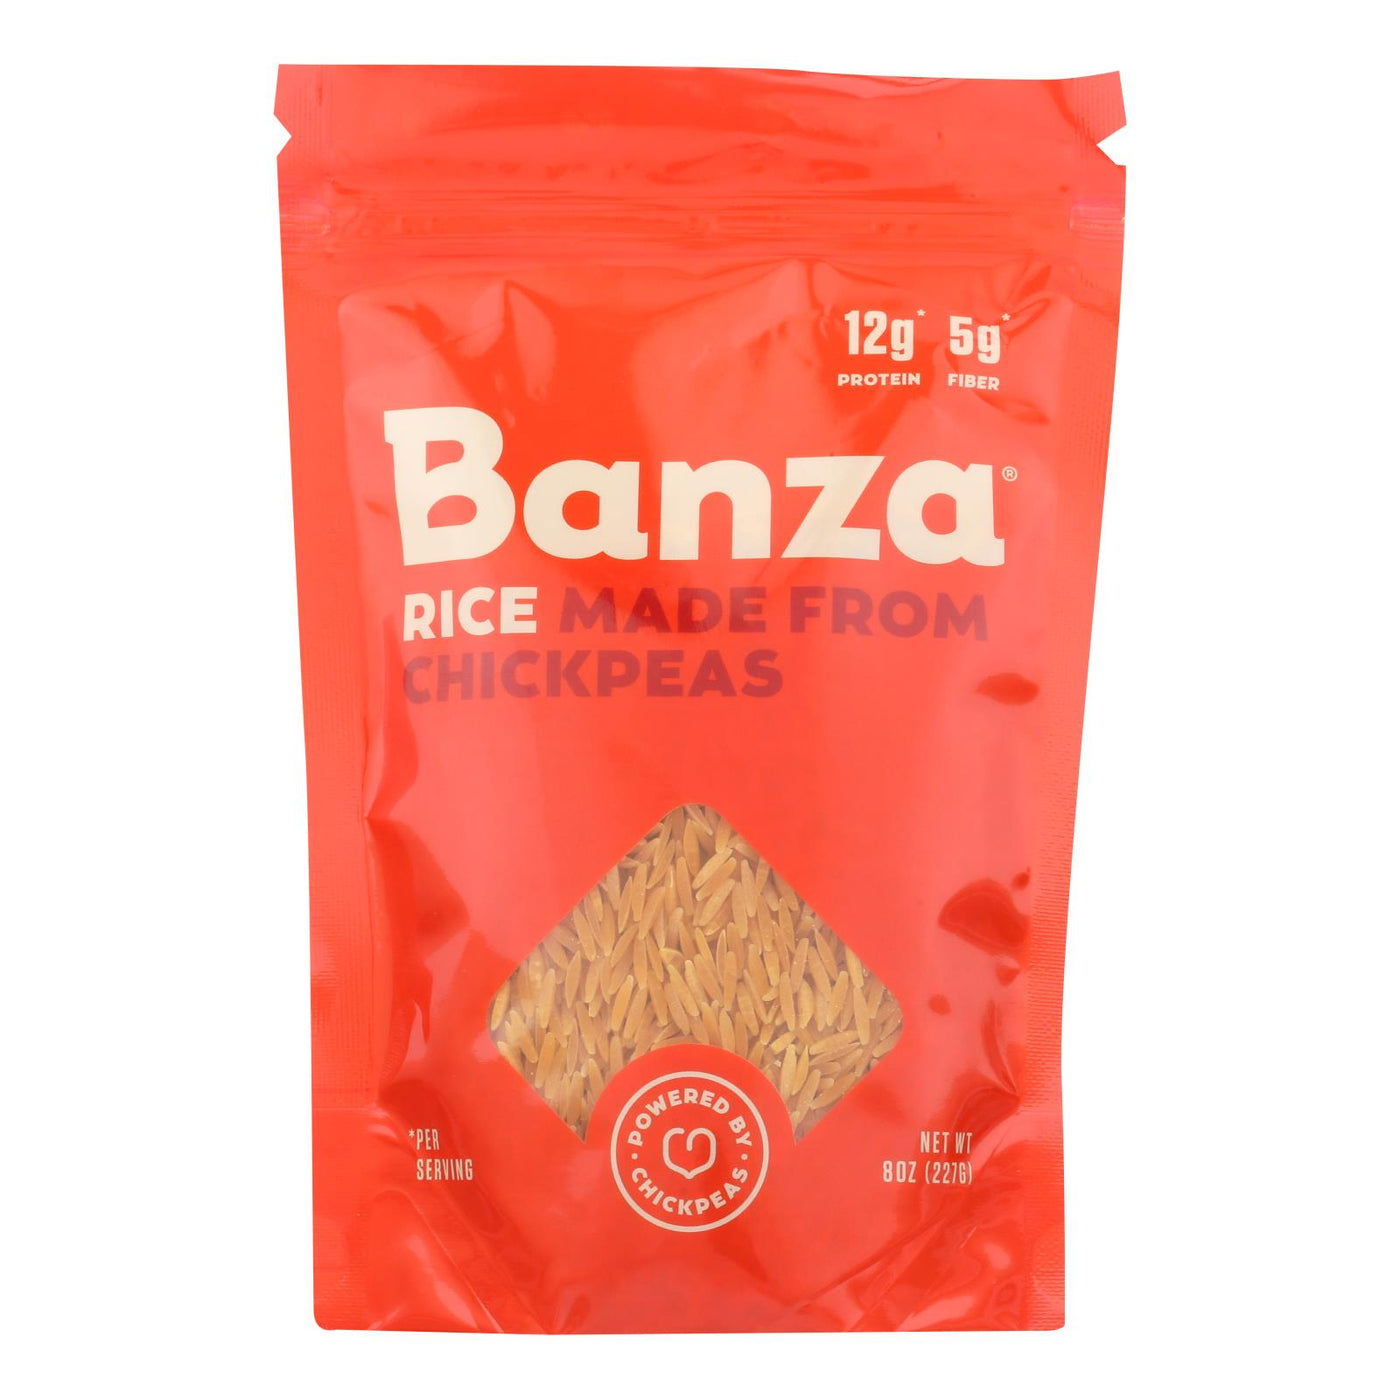 Banza - Rice Chickpea - Case Of 6 - 8 Oz | OnlyNaturals.us